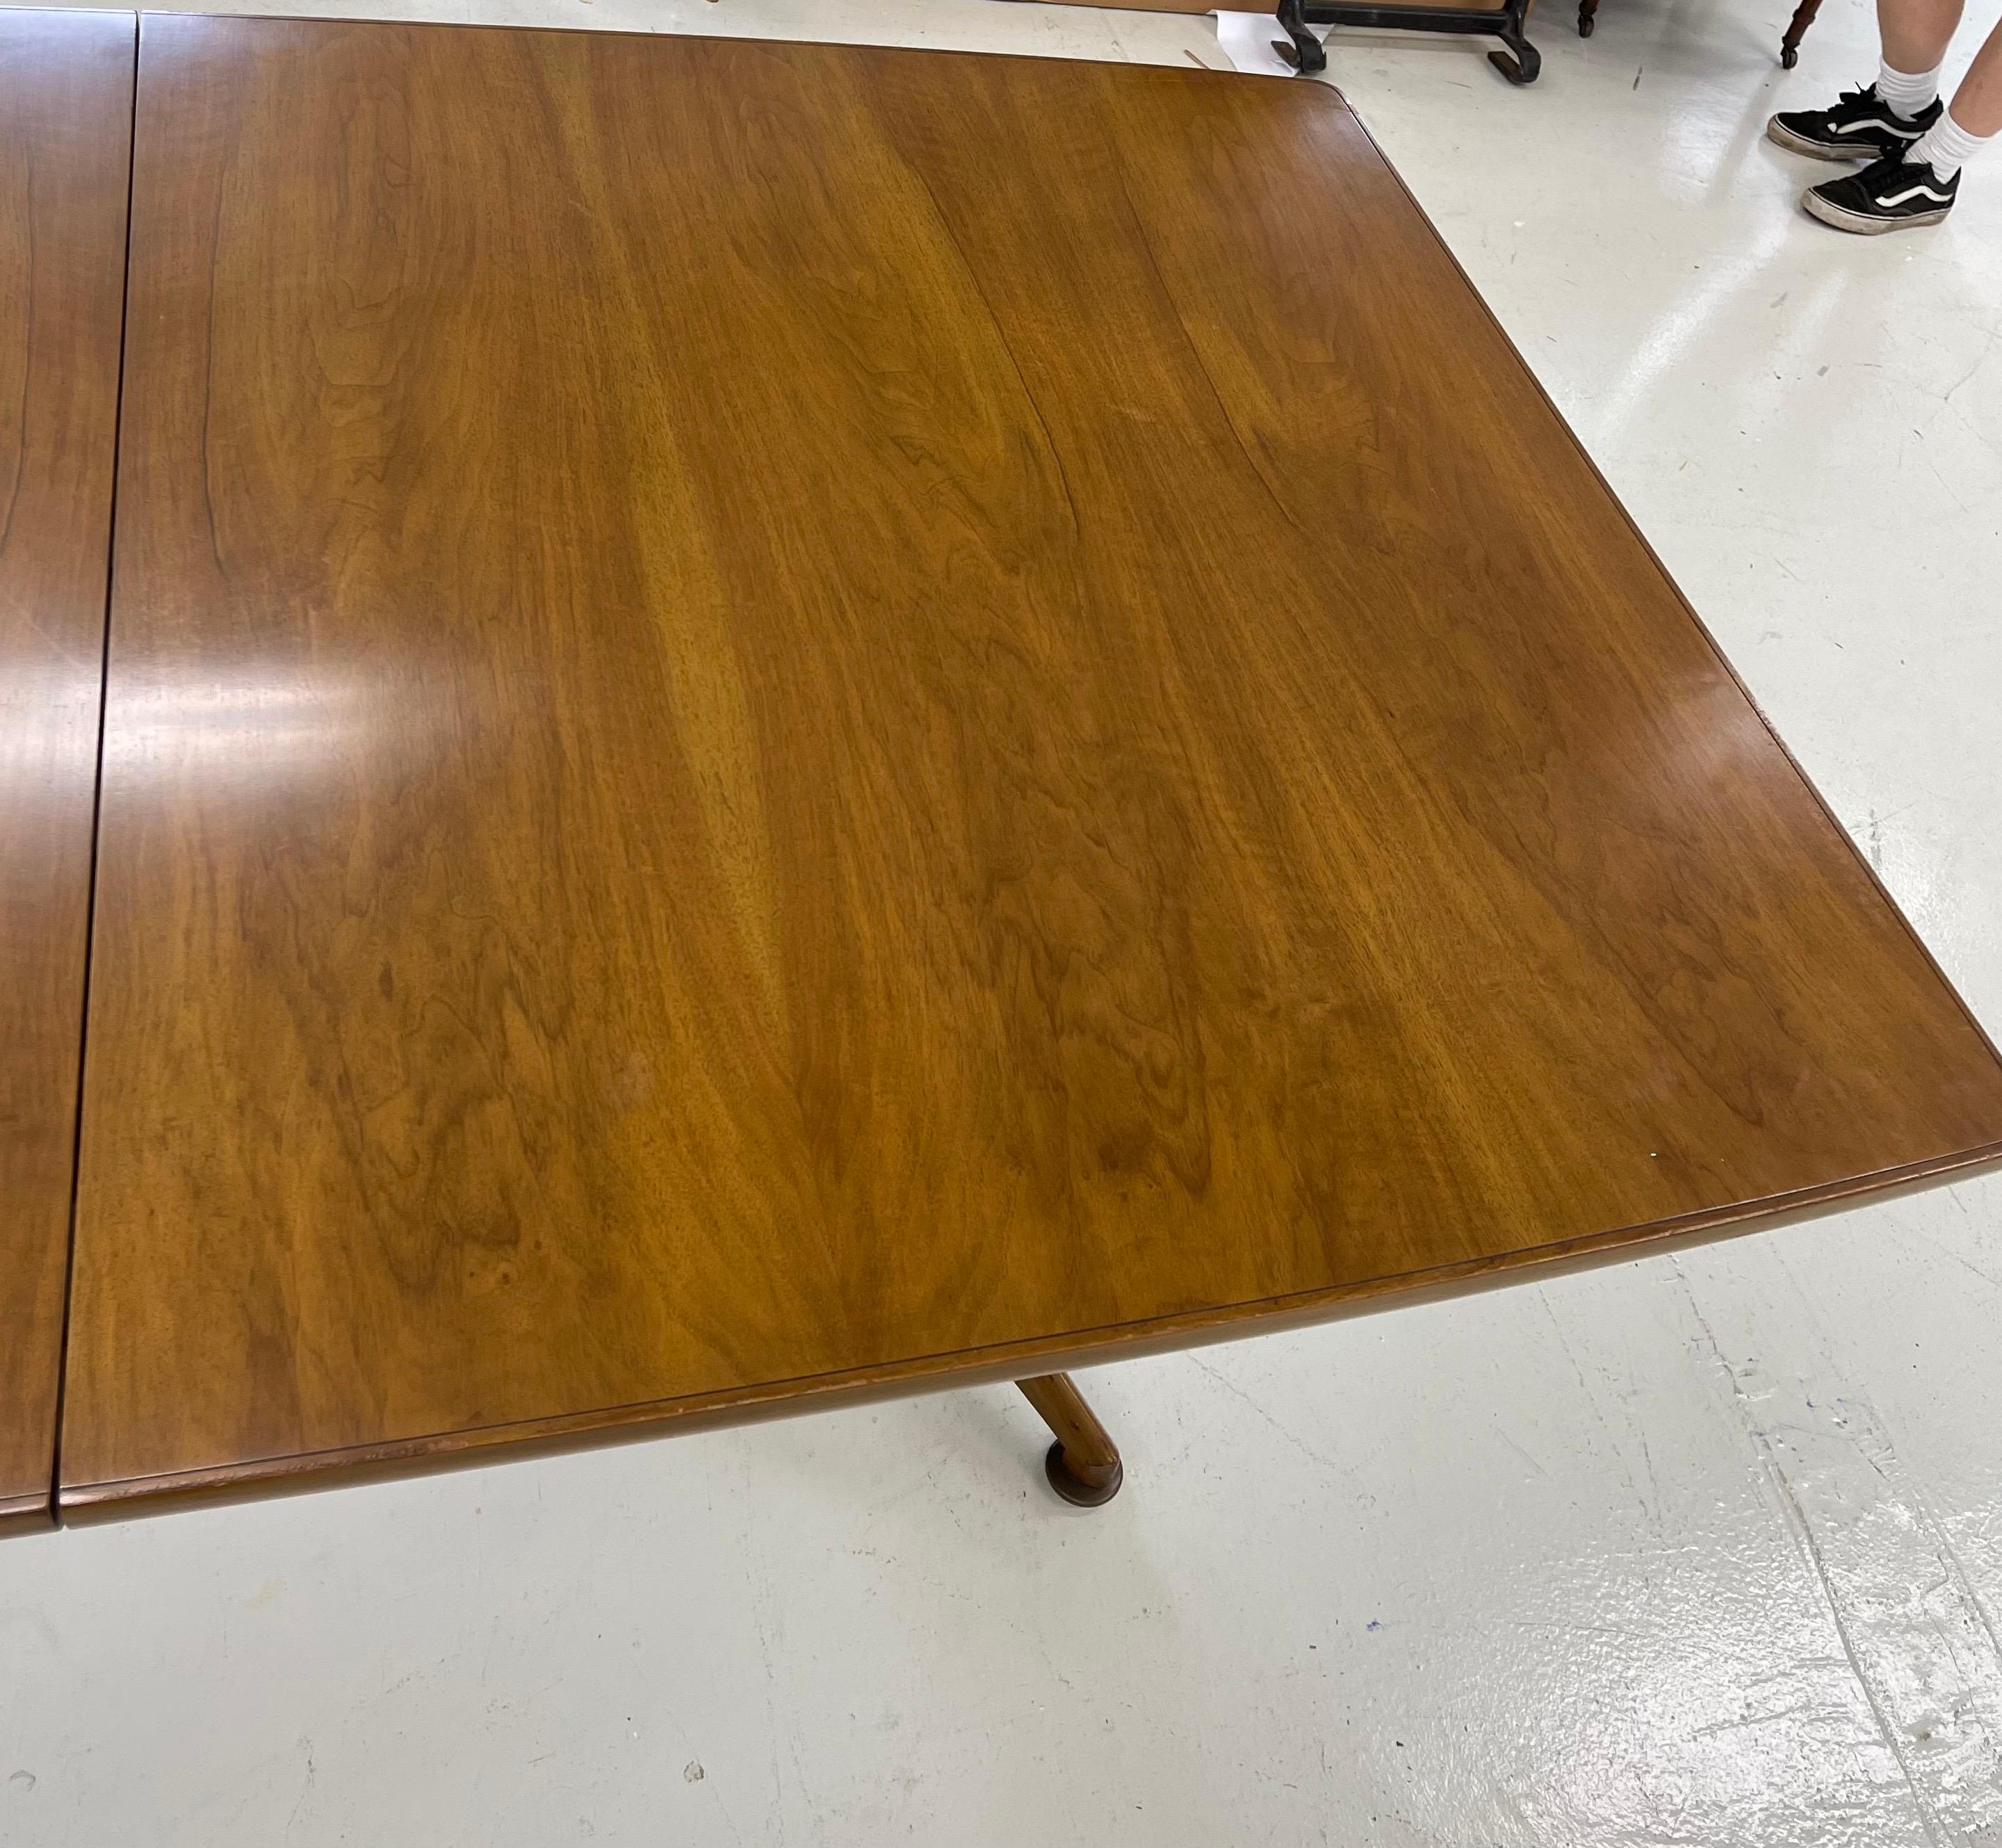 Polished Walnut Two Pedestal Dining Table with 3 Leaves For Sale